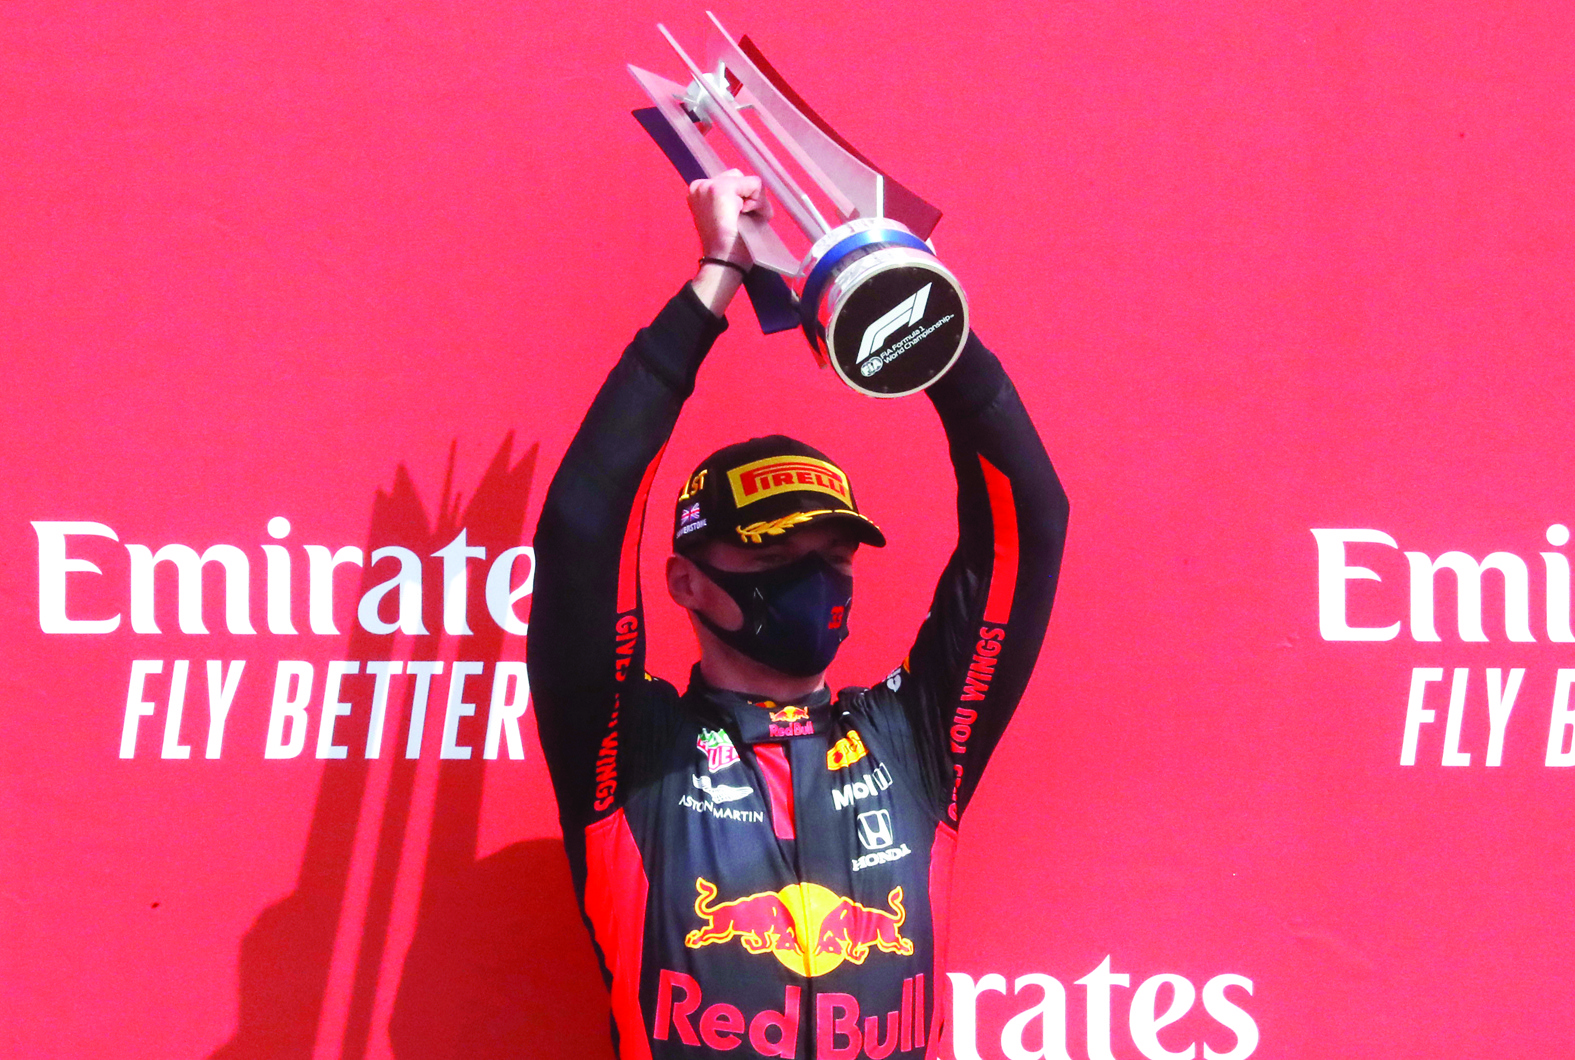 Winner Red Bull's Dutch driver Max Verstappen holds up the trophy on the podium during the presentation for the F1 70th Anniversary Grand Prix at Silverstone on August 9, 2020 in Northampton. - The race commemorates the 70th anniversary of the inaugural world championship race, held at Silverstone in 1950. (Photo by Frank Augstein / POOL / AFP)